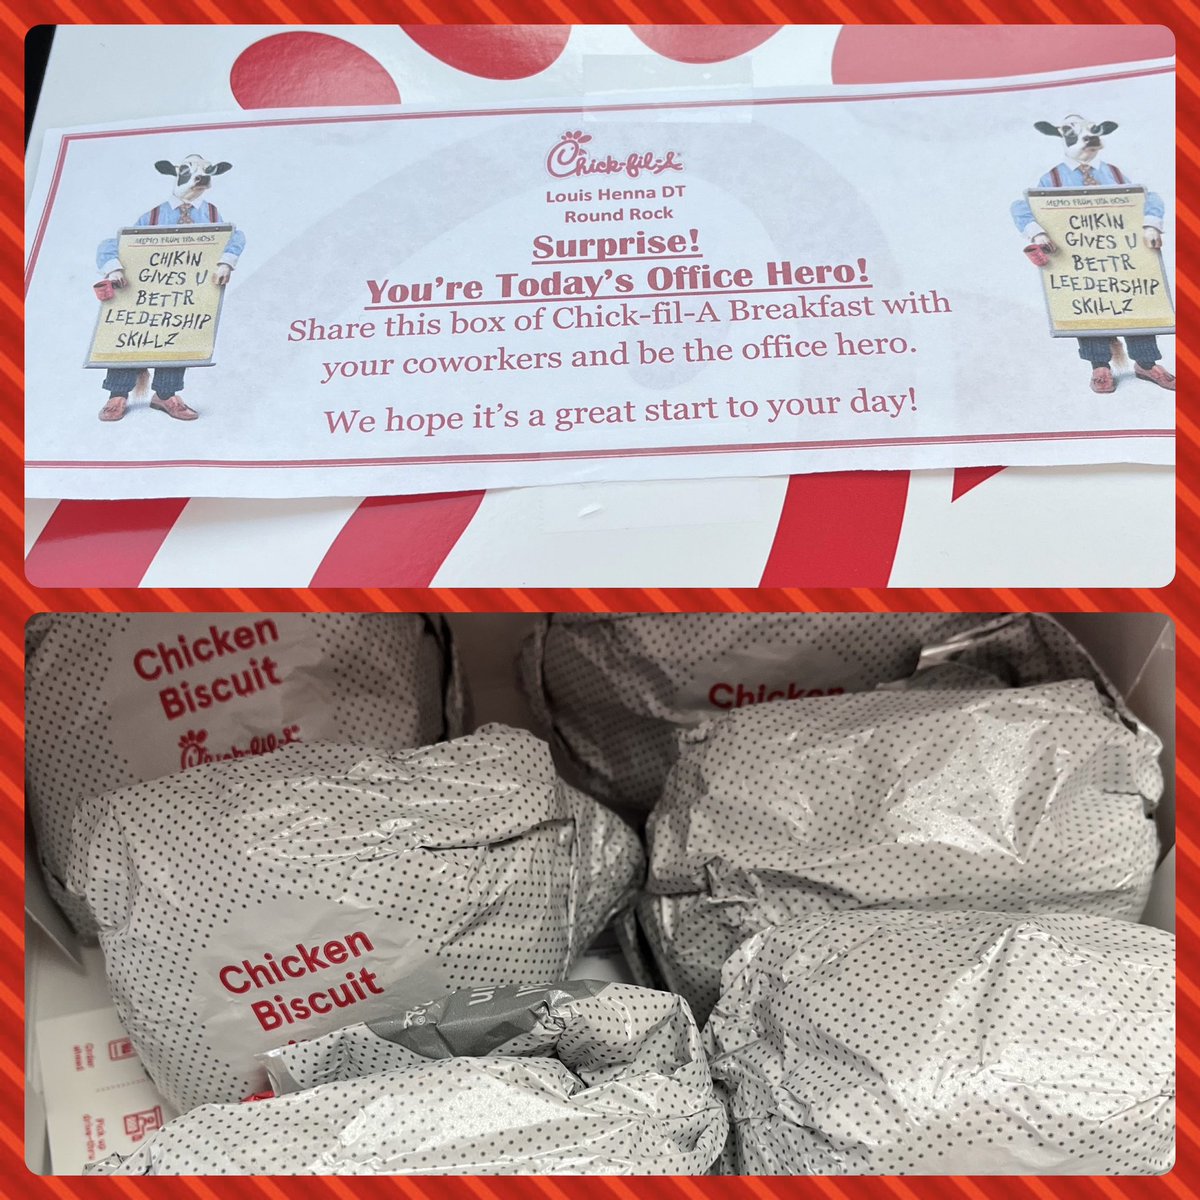 Thank you, @ChickfilA on Louis Henna in Round Rock for providing the @BluebonnetRRISD Innovation Team with breakfast today!